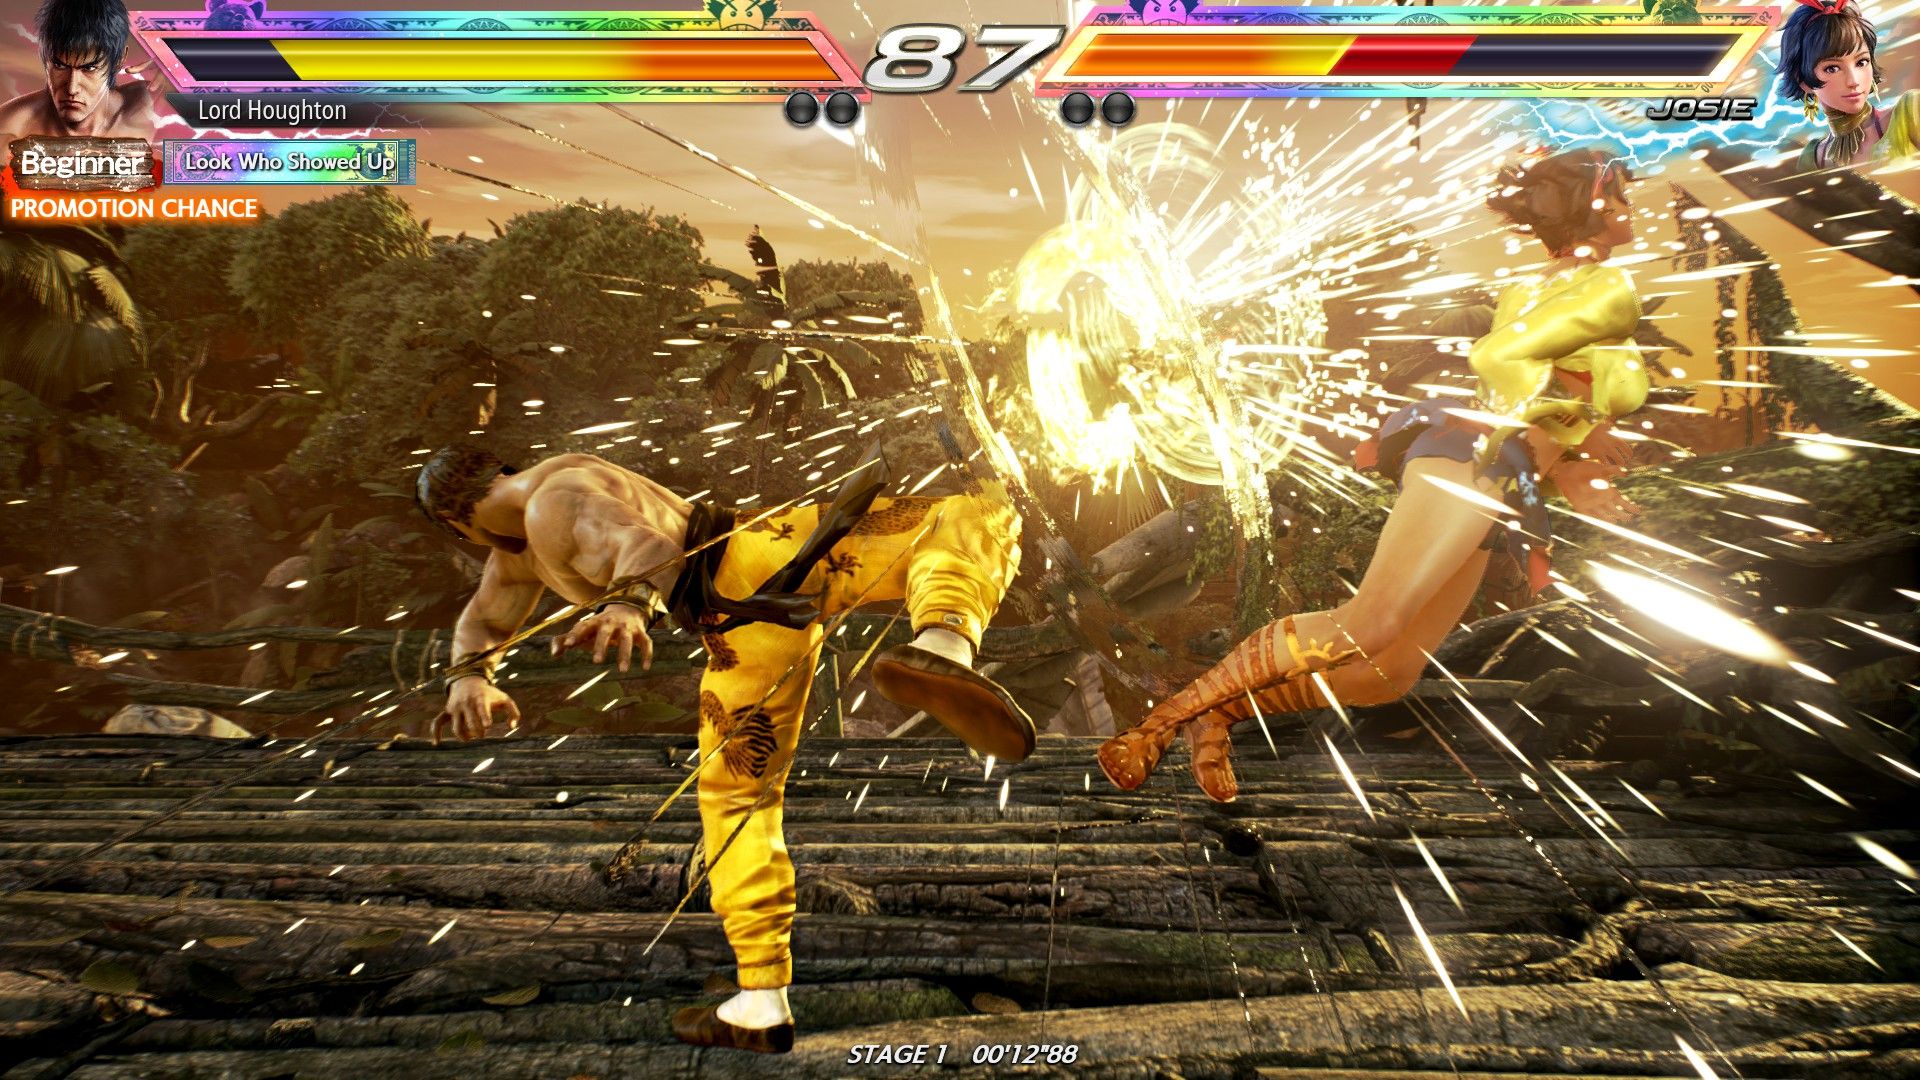 A fighter delivers a powerful kick in Tekken 7